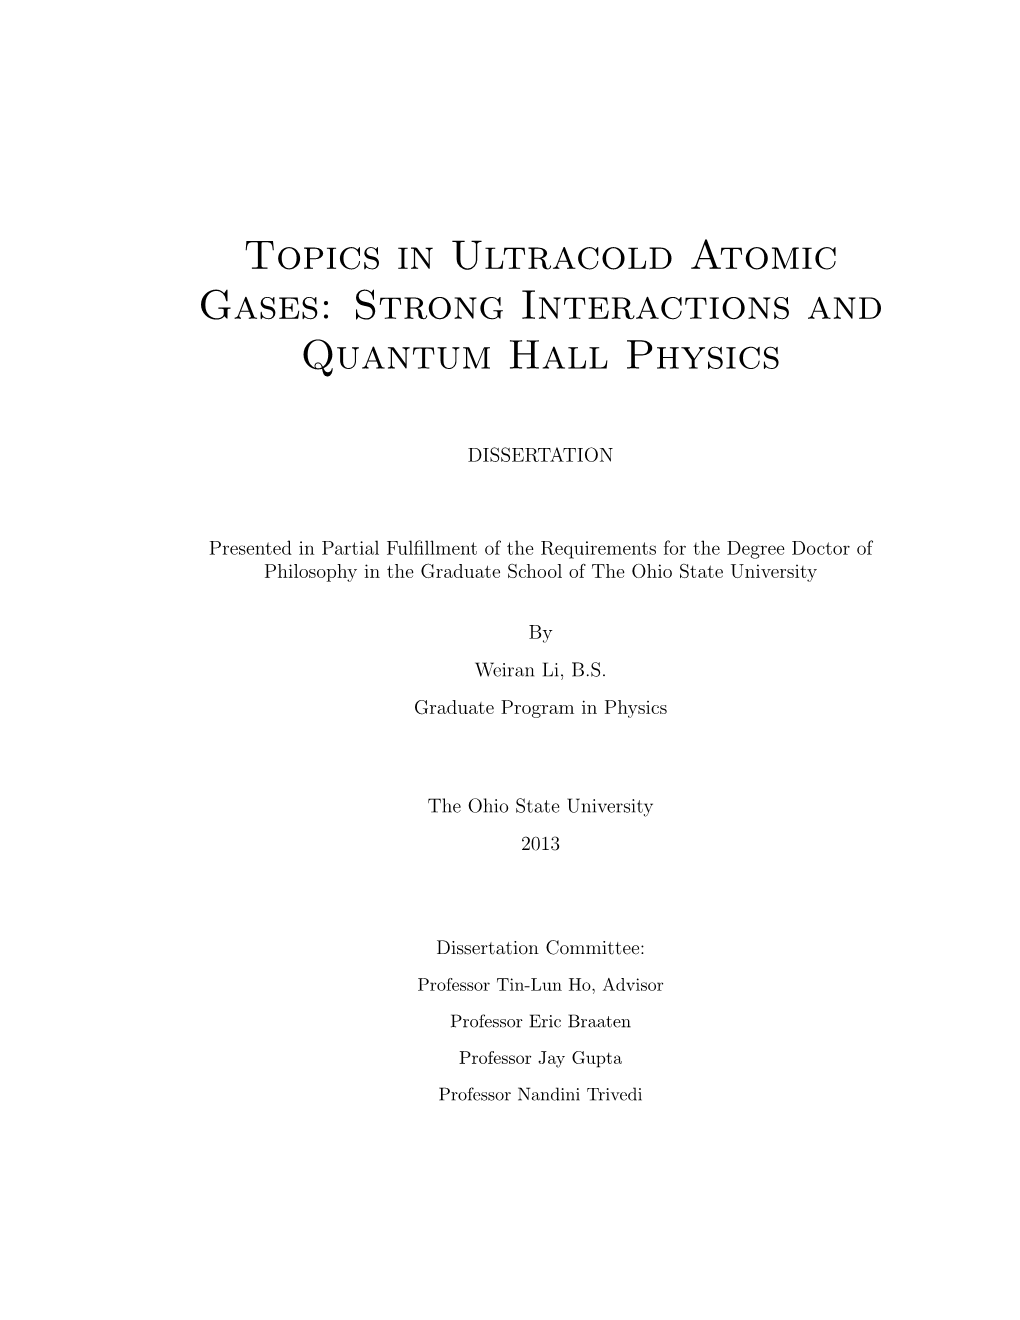 Topics in Ultracold Atomic Gases: Strong Interactions and Quantum Hall Physics